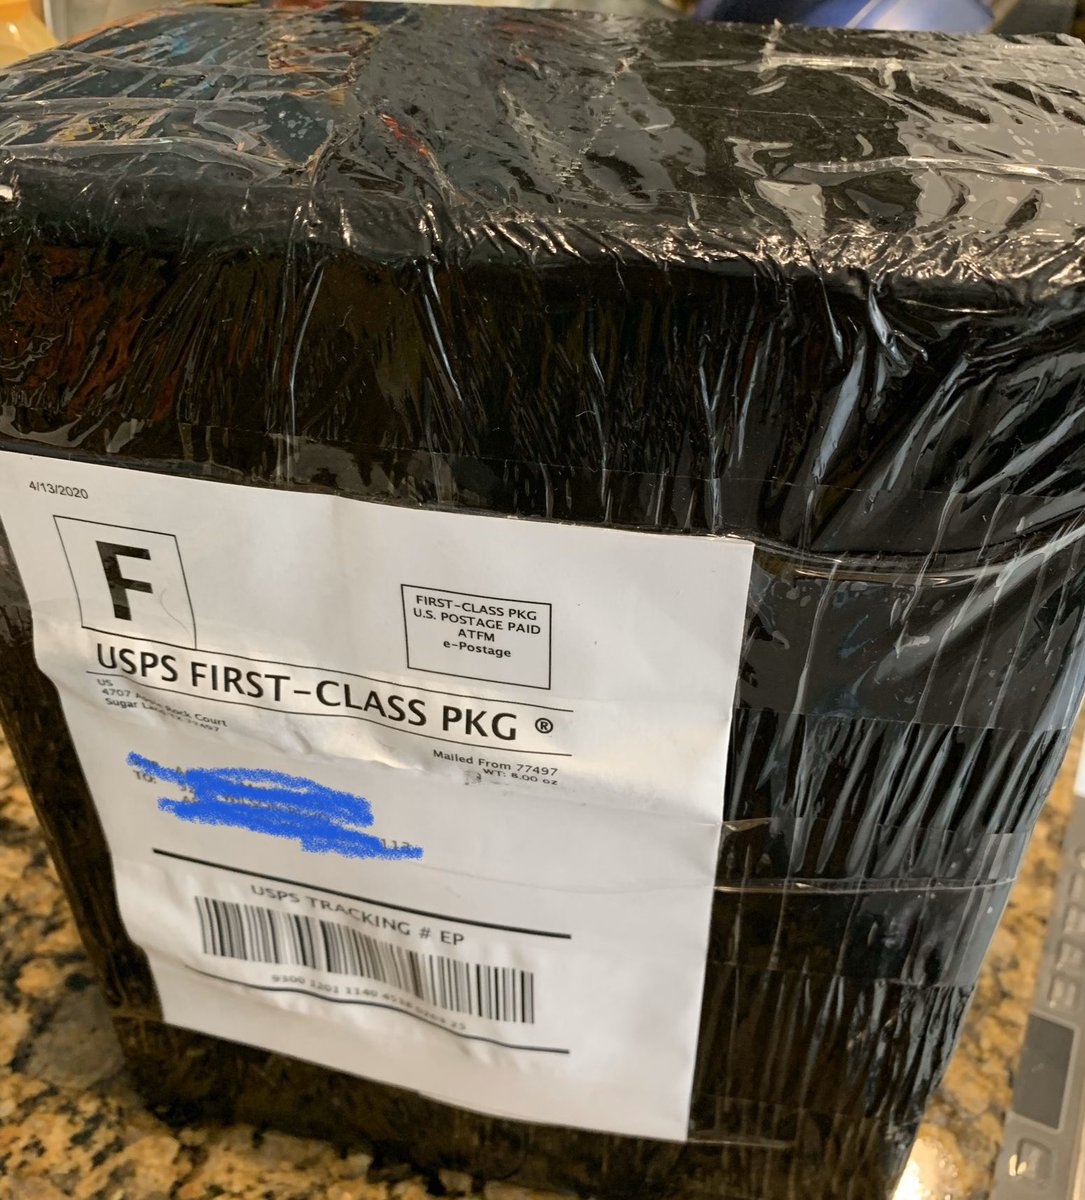 So ultimately, we tracked down muri in Houston and ordered it online. Today it arrived by US Postal Service First-Class like a Christmas, Eid, or Durga Pujo geepht.